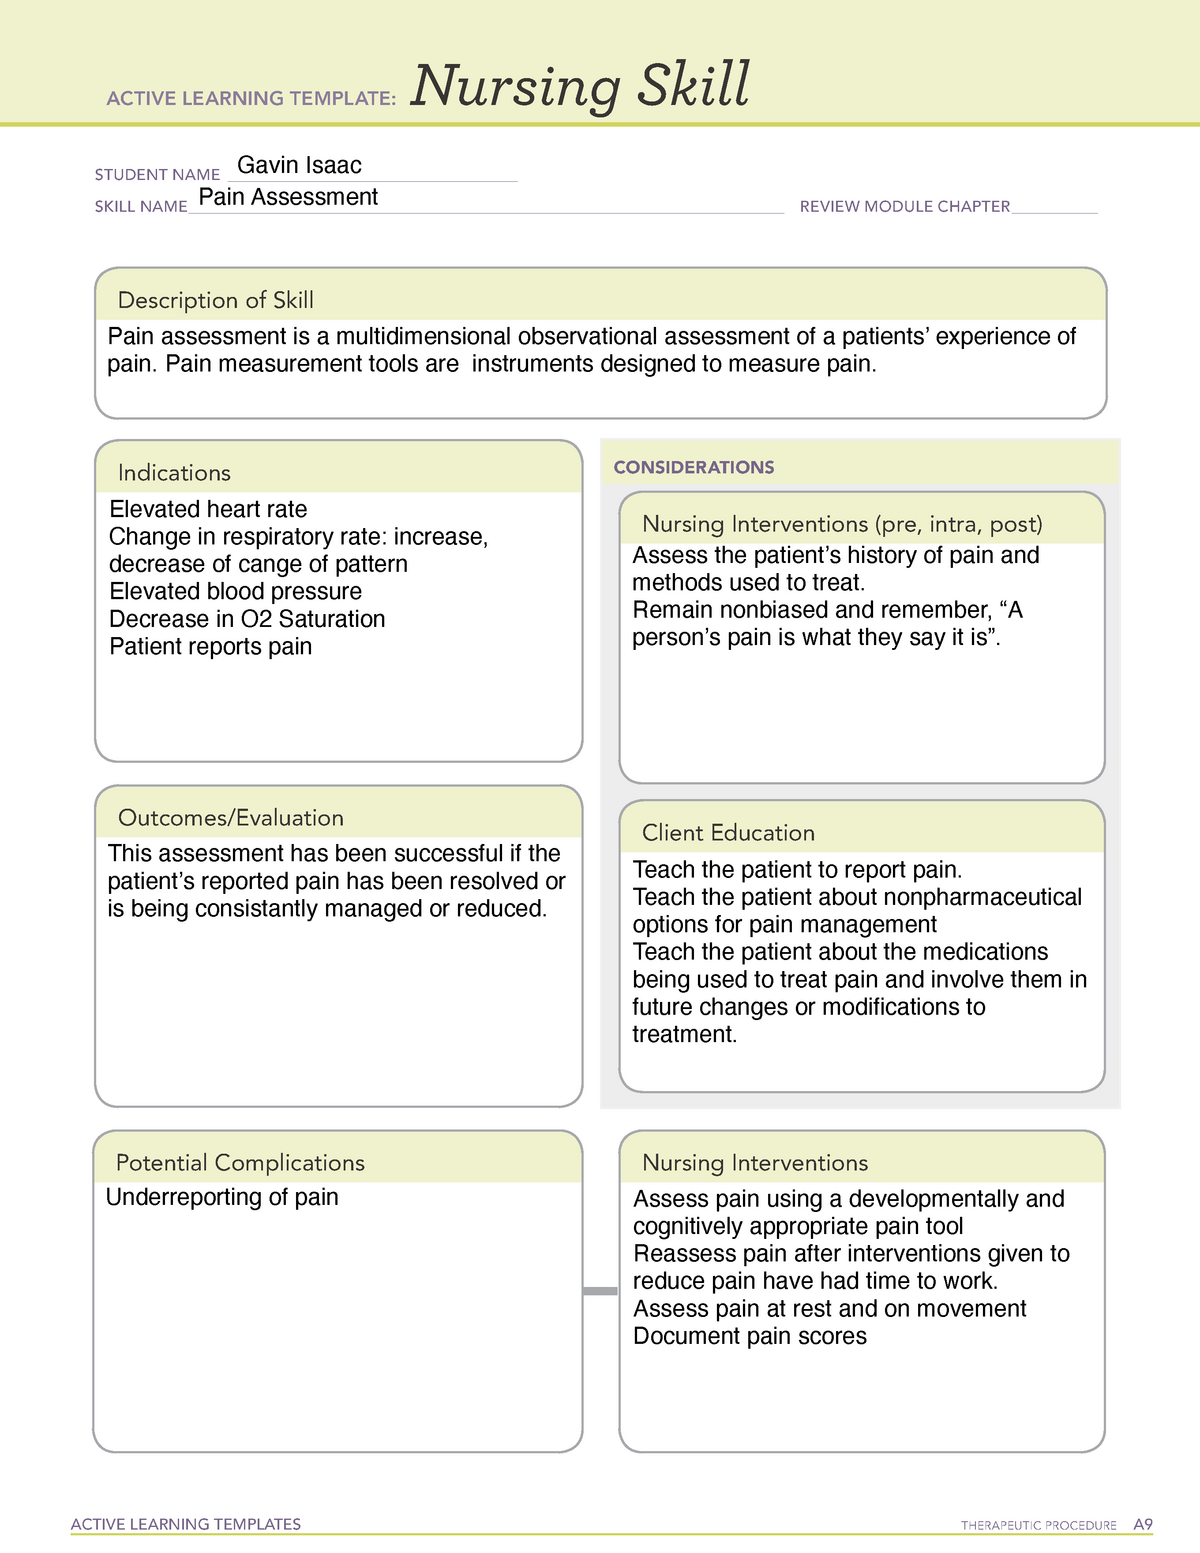 Skill Pain Assessment - Active Learning Template - ACTIVE LEARNING ...